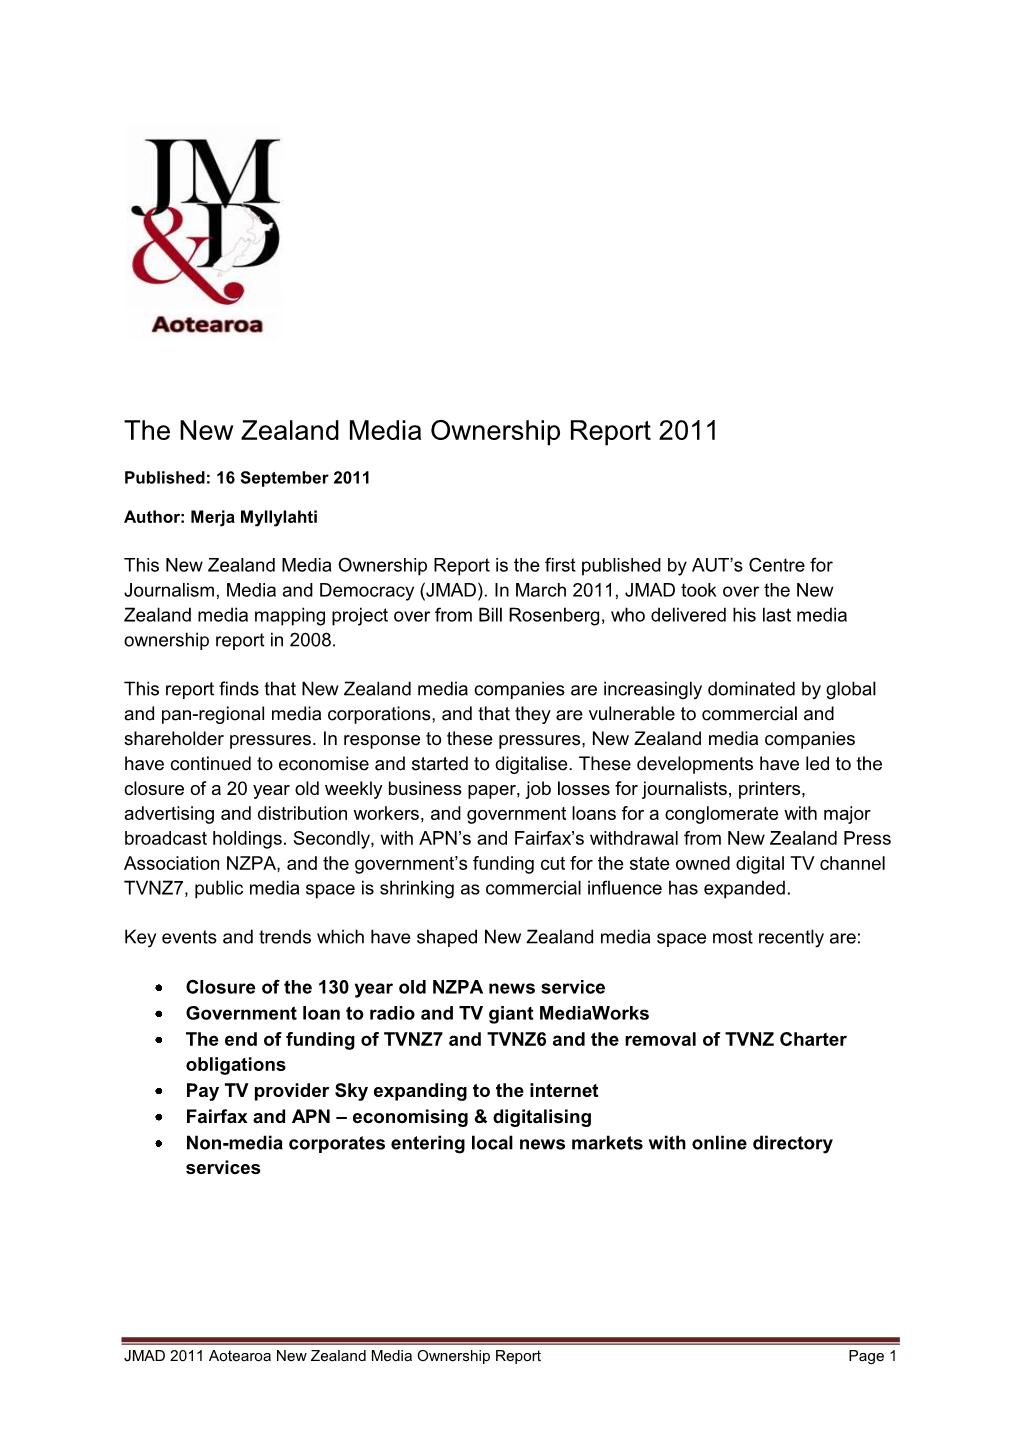 The New Zealand Media Ownership Report 2011